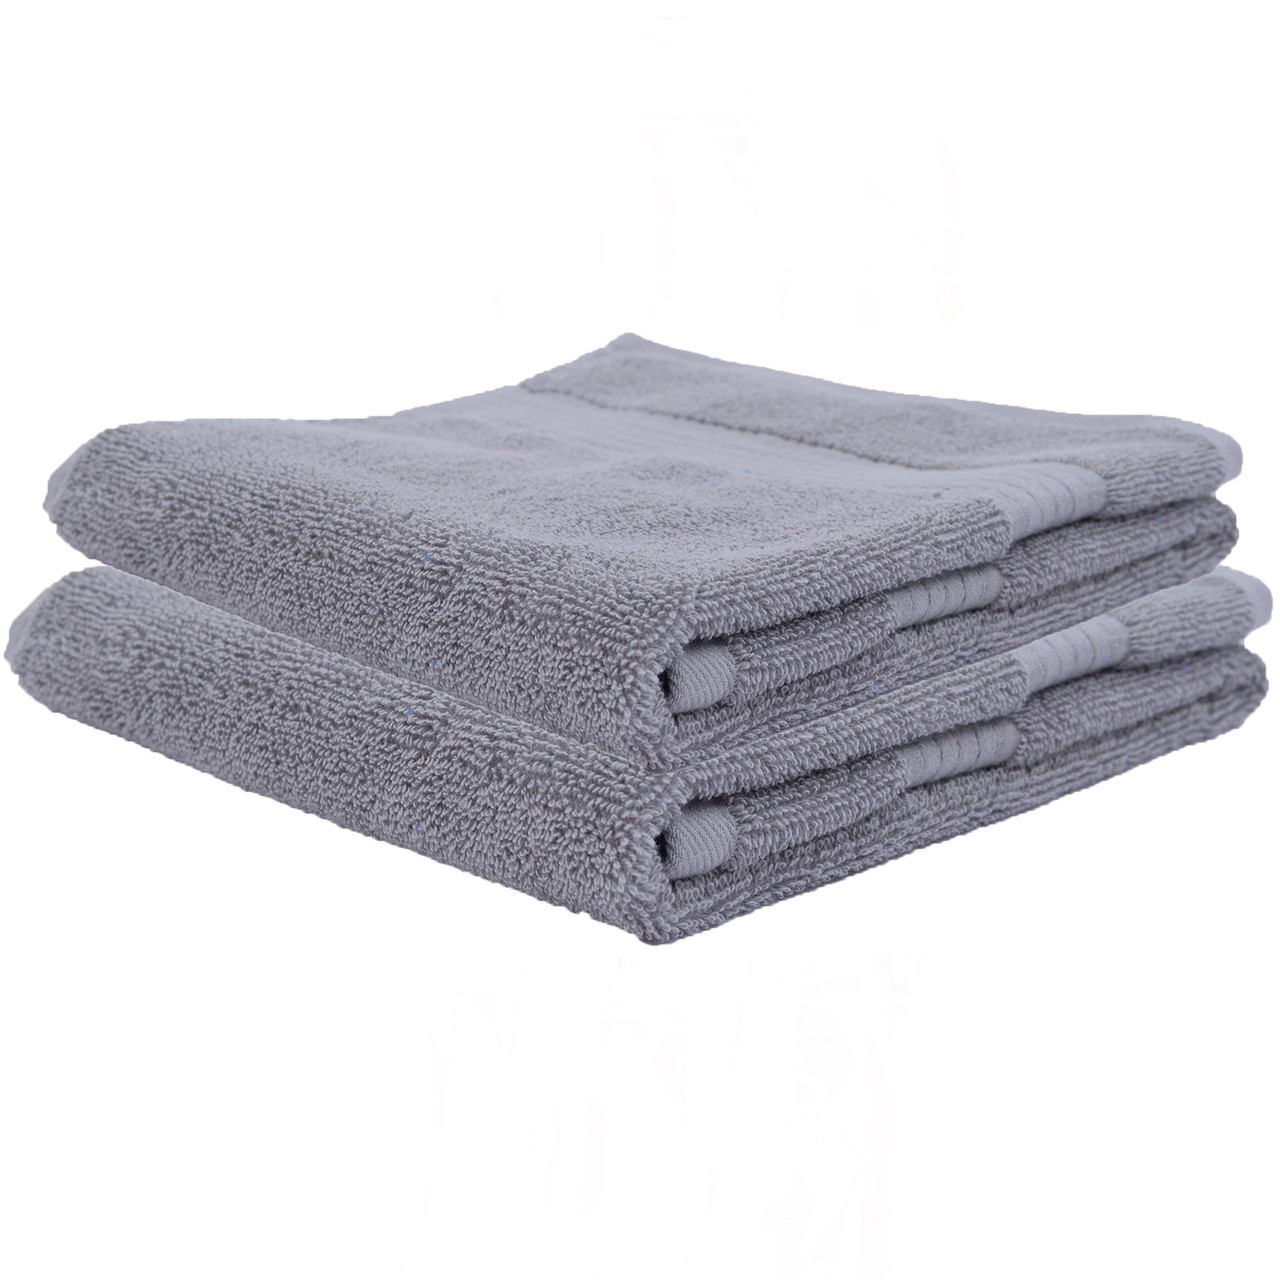 Alpine Swiss 100% Cotton Towel Set 2 Piece Soft and Absorbent 500 GSM Face  Towels, Hand Towels, Bath Towels, or Bath Sheets - Alpine Swiss